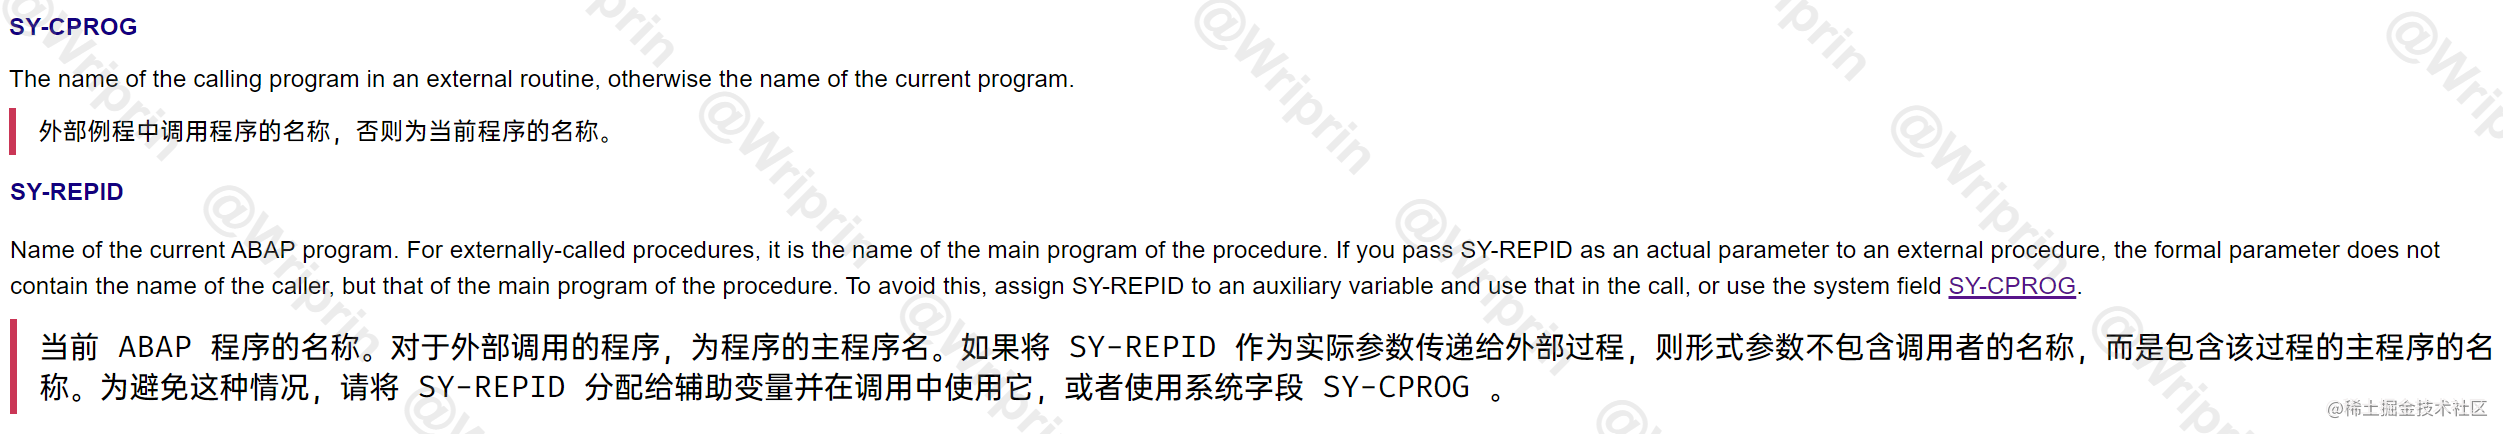 SAP-ABAP-SY-REPID-STAIN-01.png